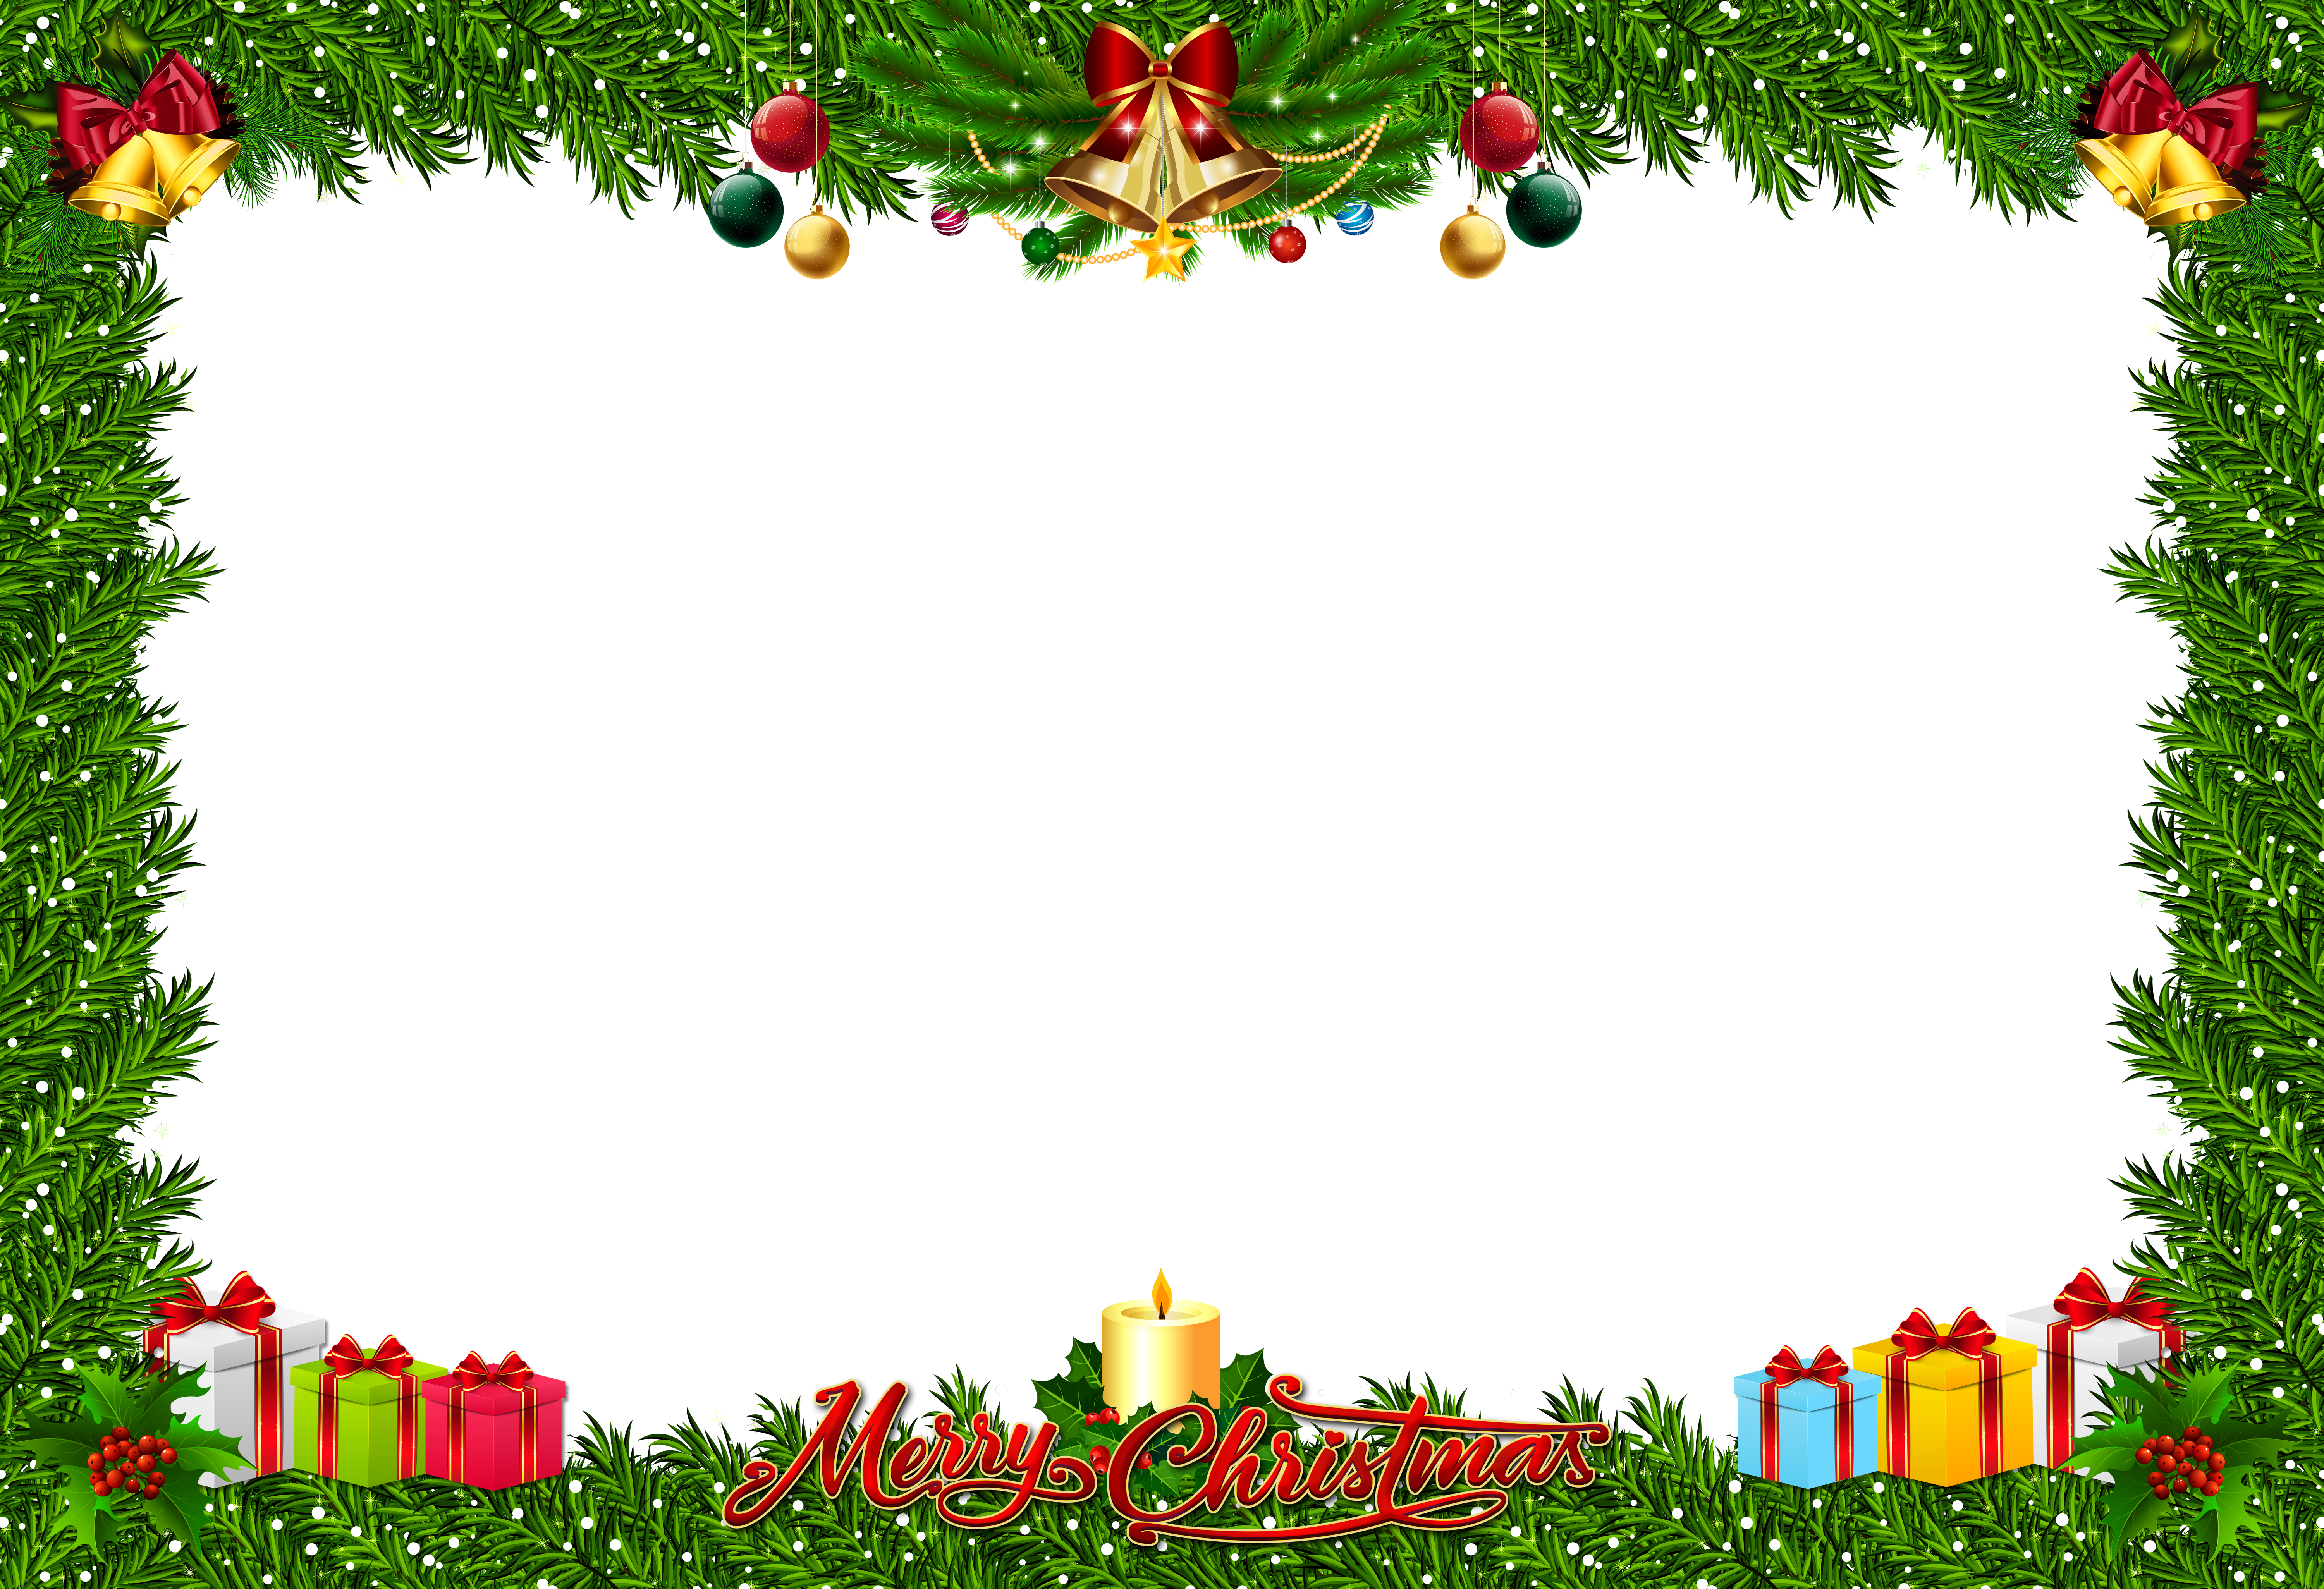 292 Christmas Frame free clipart.